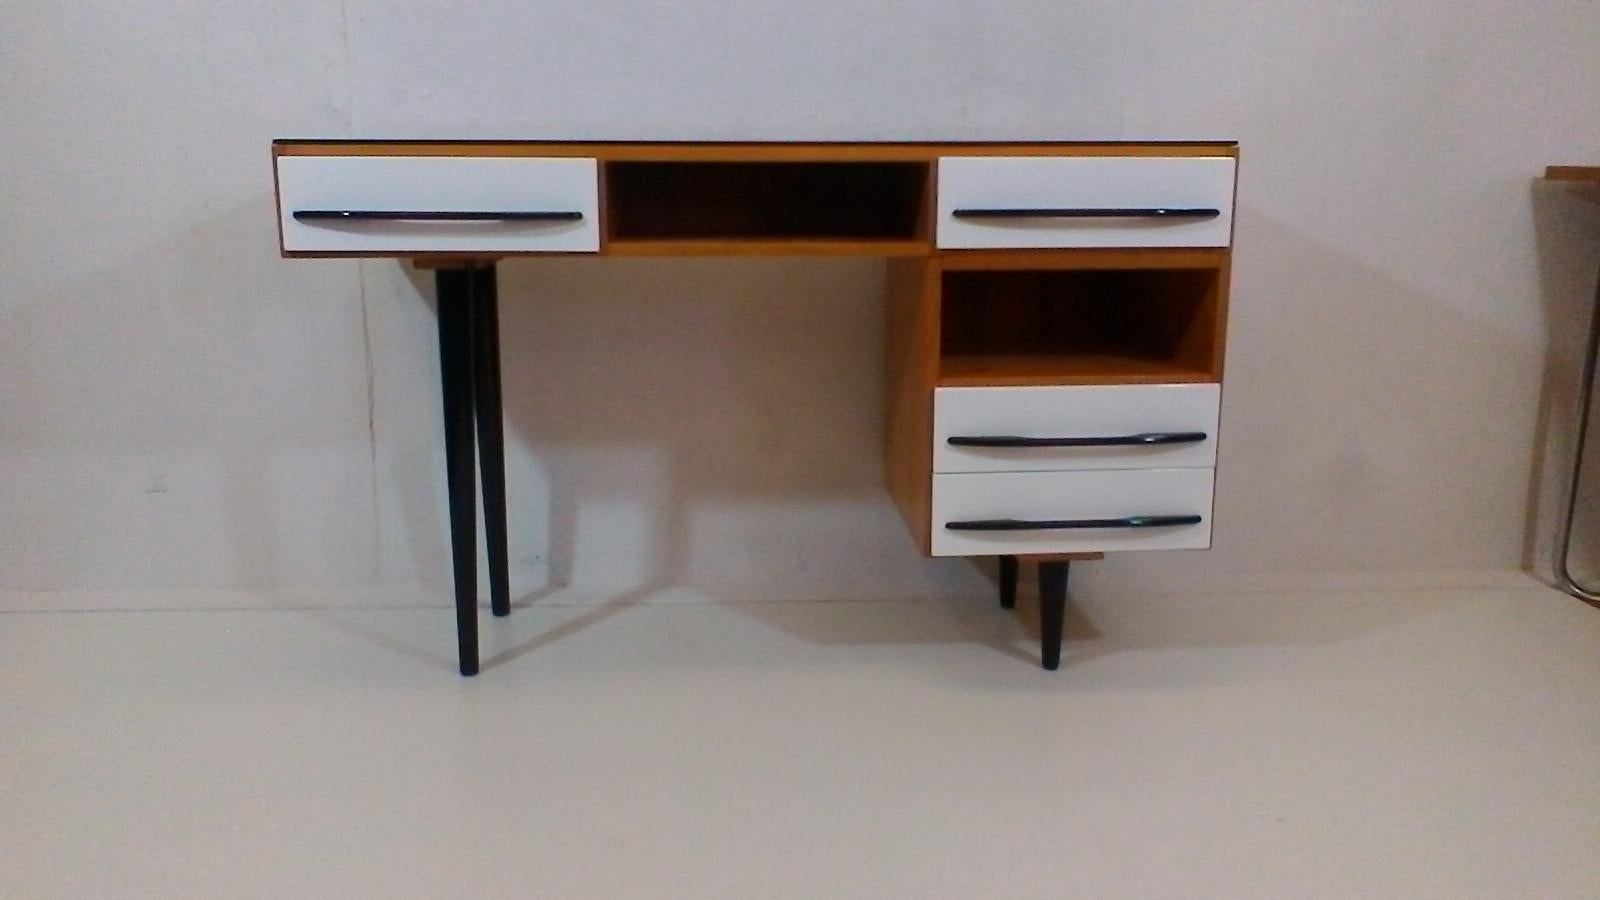 The item is made of veneered and varnished wood, on upper surface is black opax glass, corpus is varnished quality polyurethane varnish. drawers and legs are varnished into the original colours- black and white in high gloss.